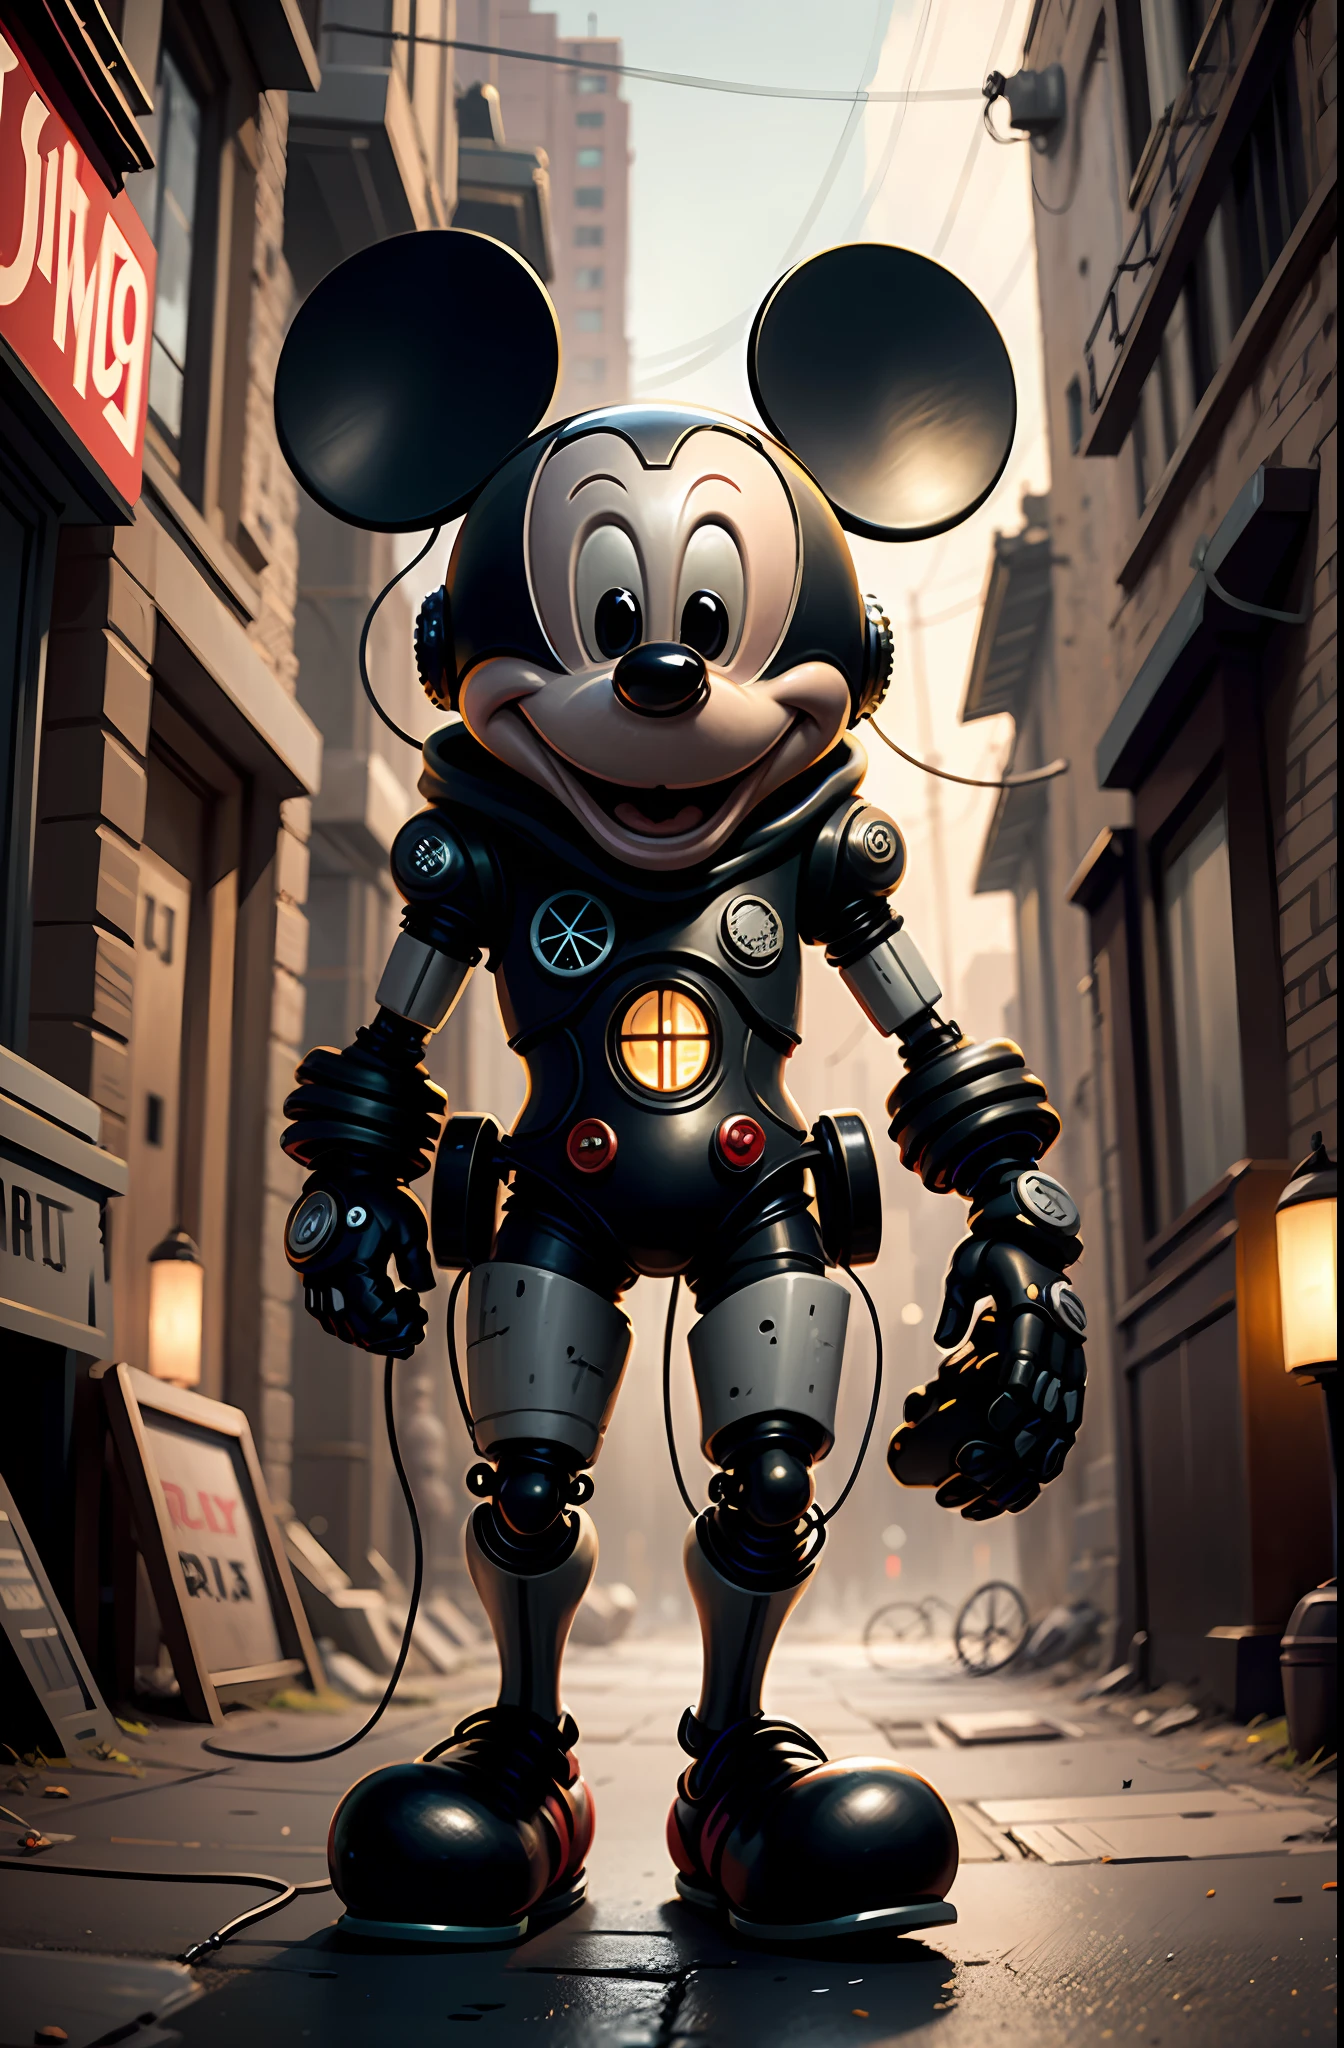 Mickey mouse in a suit standing on a city street - SeaArt AI